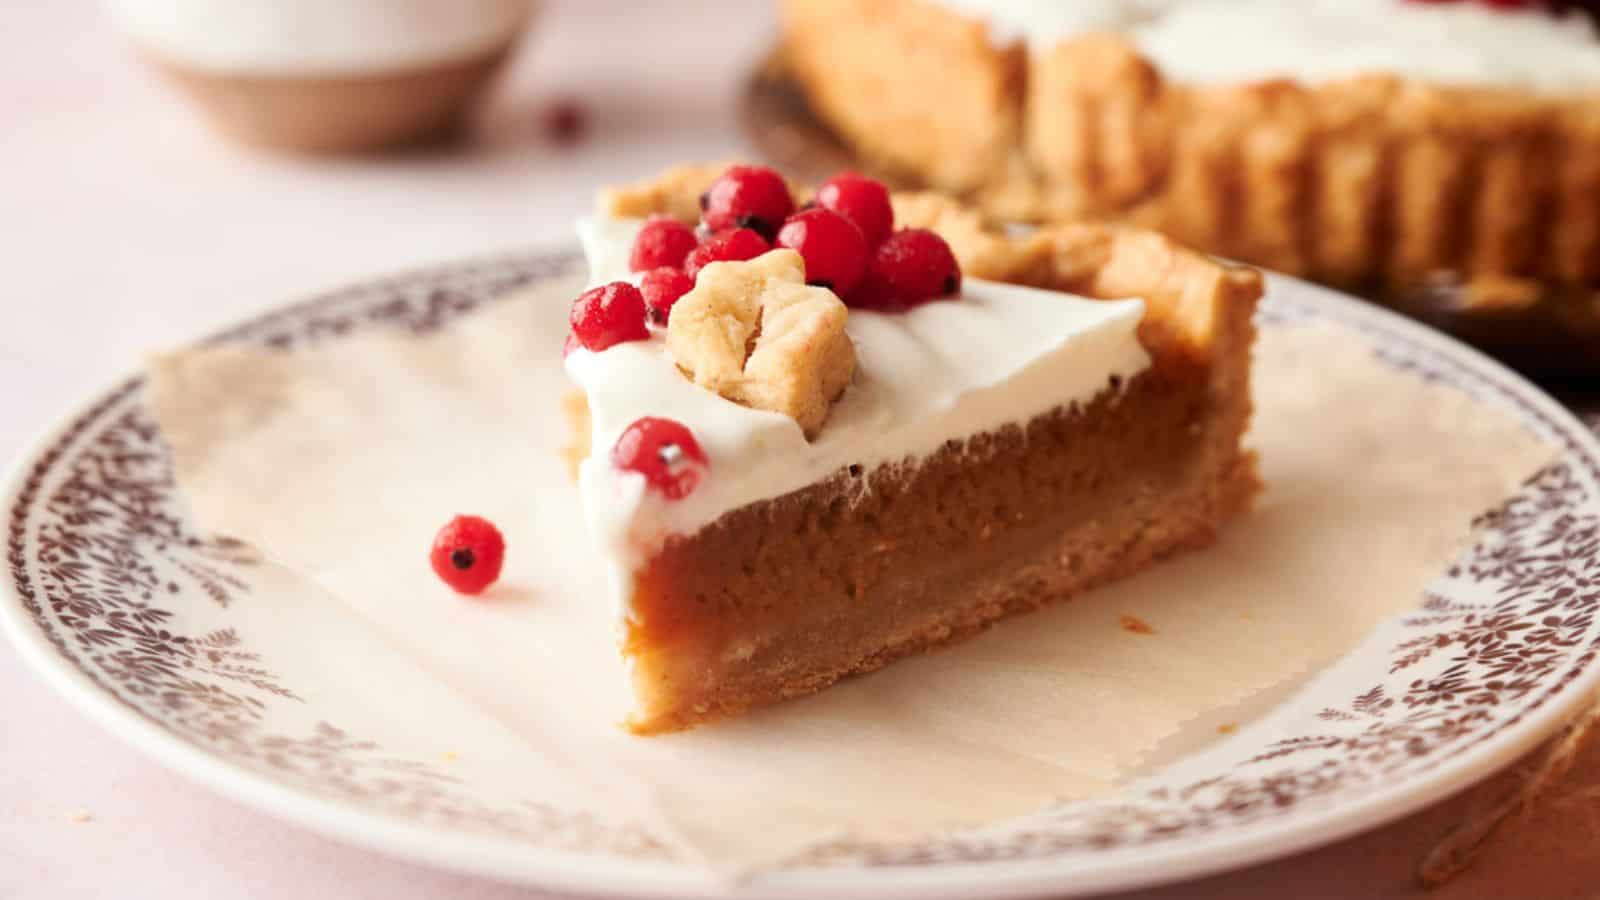 <p>A classic for a reason, Pumpkin Pie embodies the essence of fall in each silky bite. With its warm spices and smooth texture, it’s a dessert that’s impossible to resist during the season.<br><strong>Get the Recipe: </strong><a href="https://www.splashoftaste.com/pumpkin-pie/?utm_source=msn&utm_medium=page&utm_campaign=msn">Pumpkin Pie</a></p>